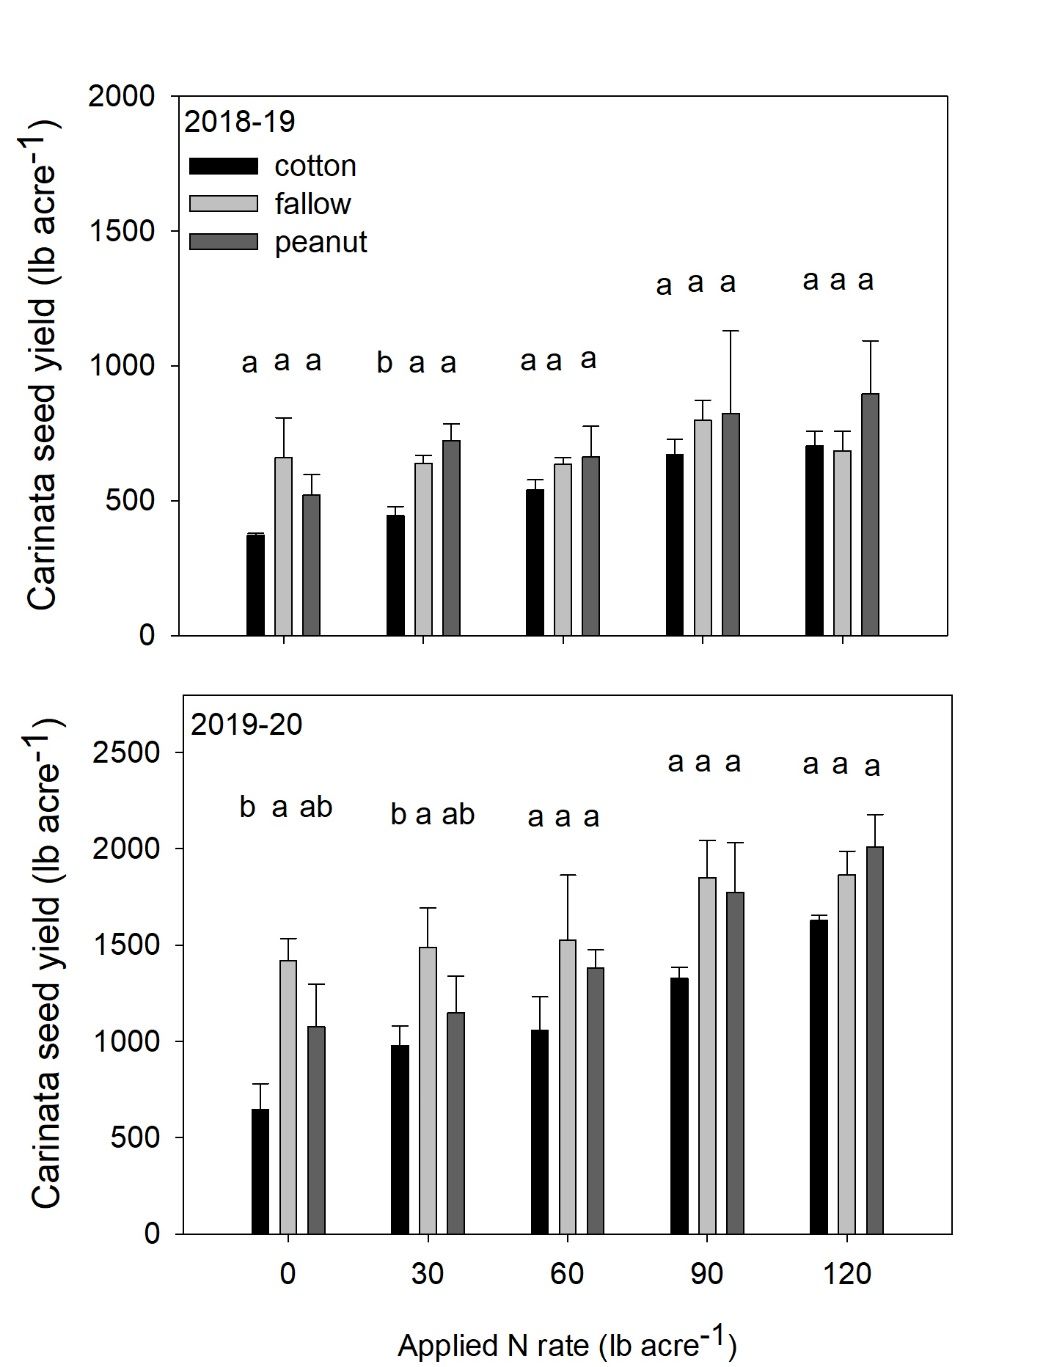 Carinata seed yield response to fertilization with 0, 30, 60, 90 and 120 lb. N acre-1 in former peanuts, cotton and fallow plots during 2018-19 and 2019-20 at Jay, FL. Error bars represent standard errors of the mean. Note vertical axis scales are different. Within year and N rate, means that share the same letter are not significantly different at  = 0.05 according to Tukey’s HSD. 